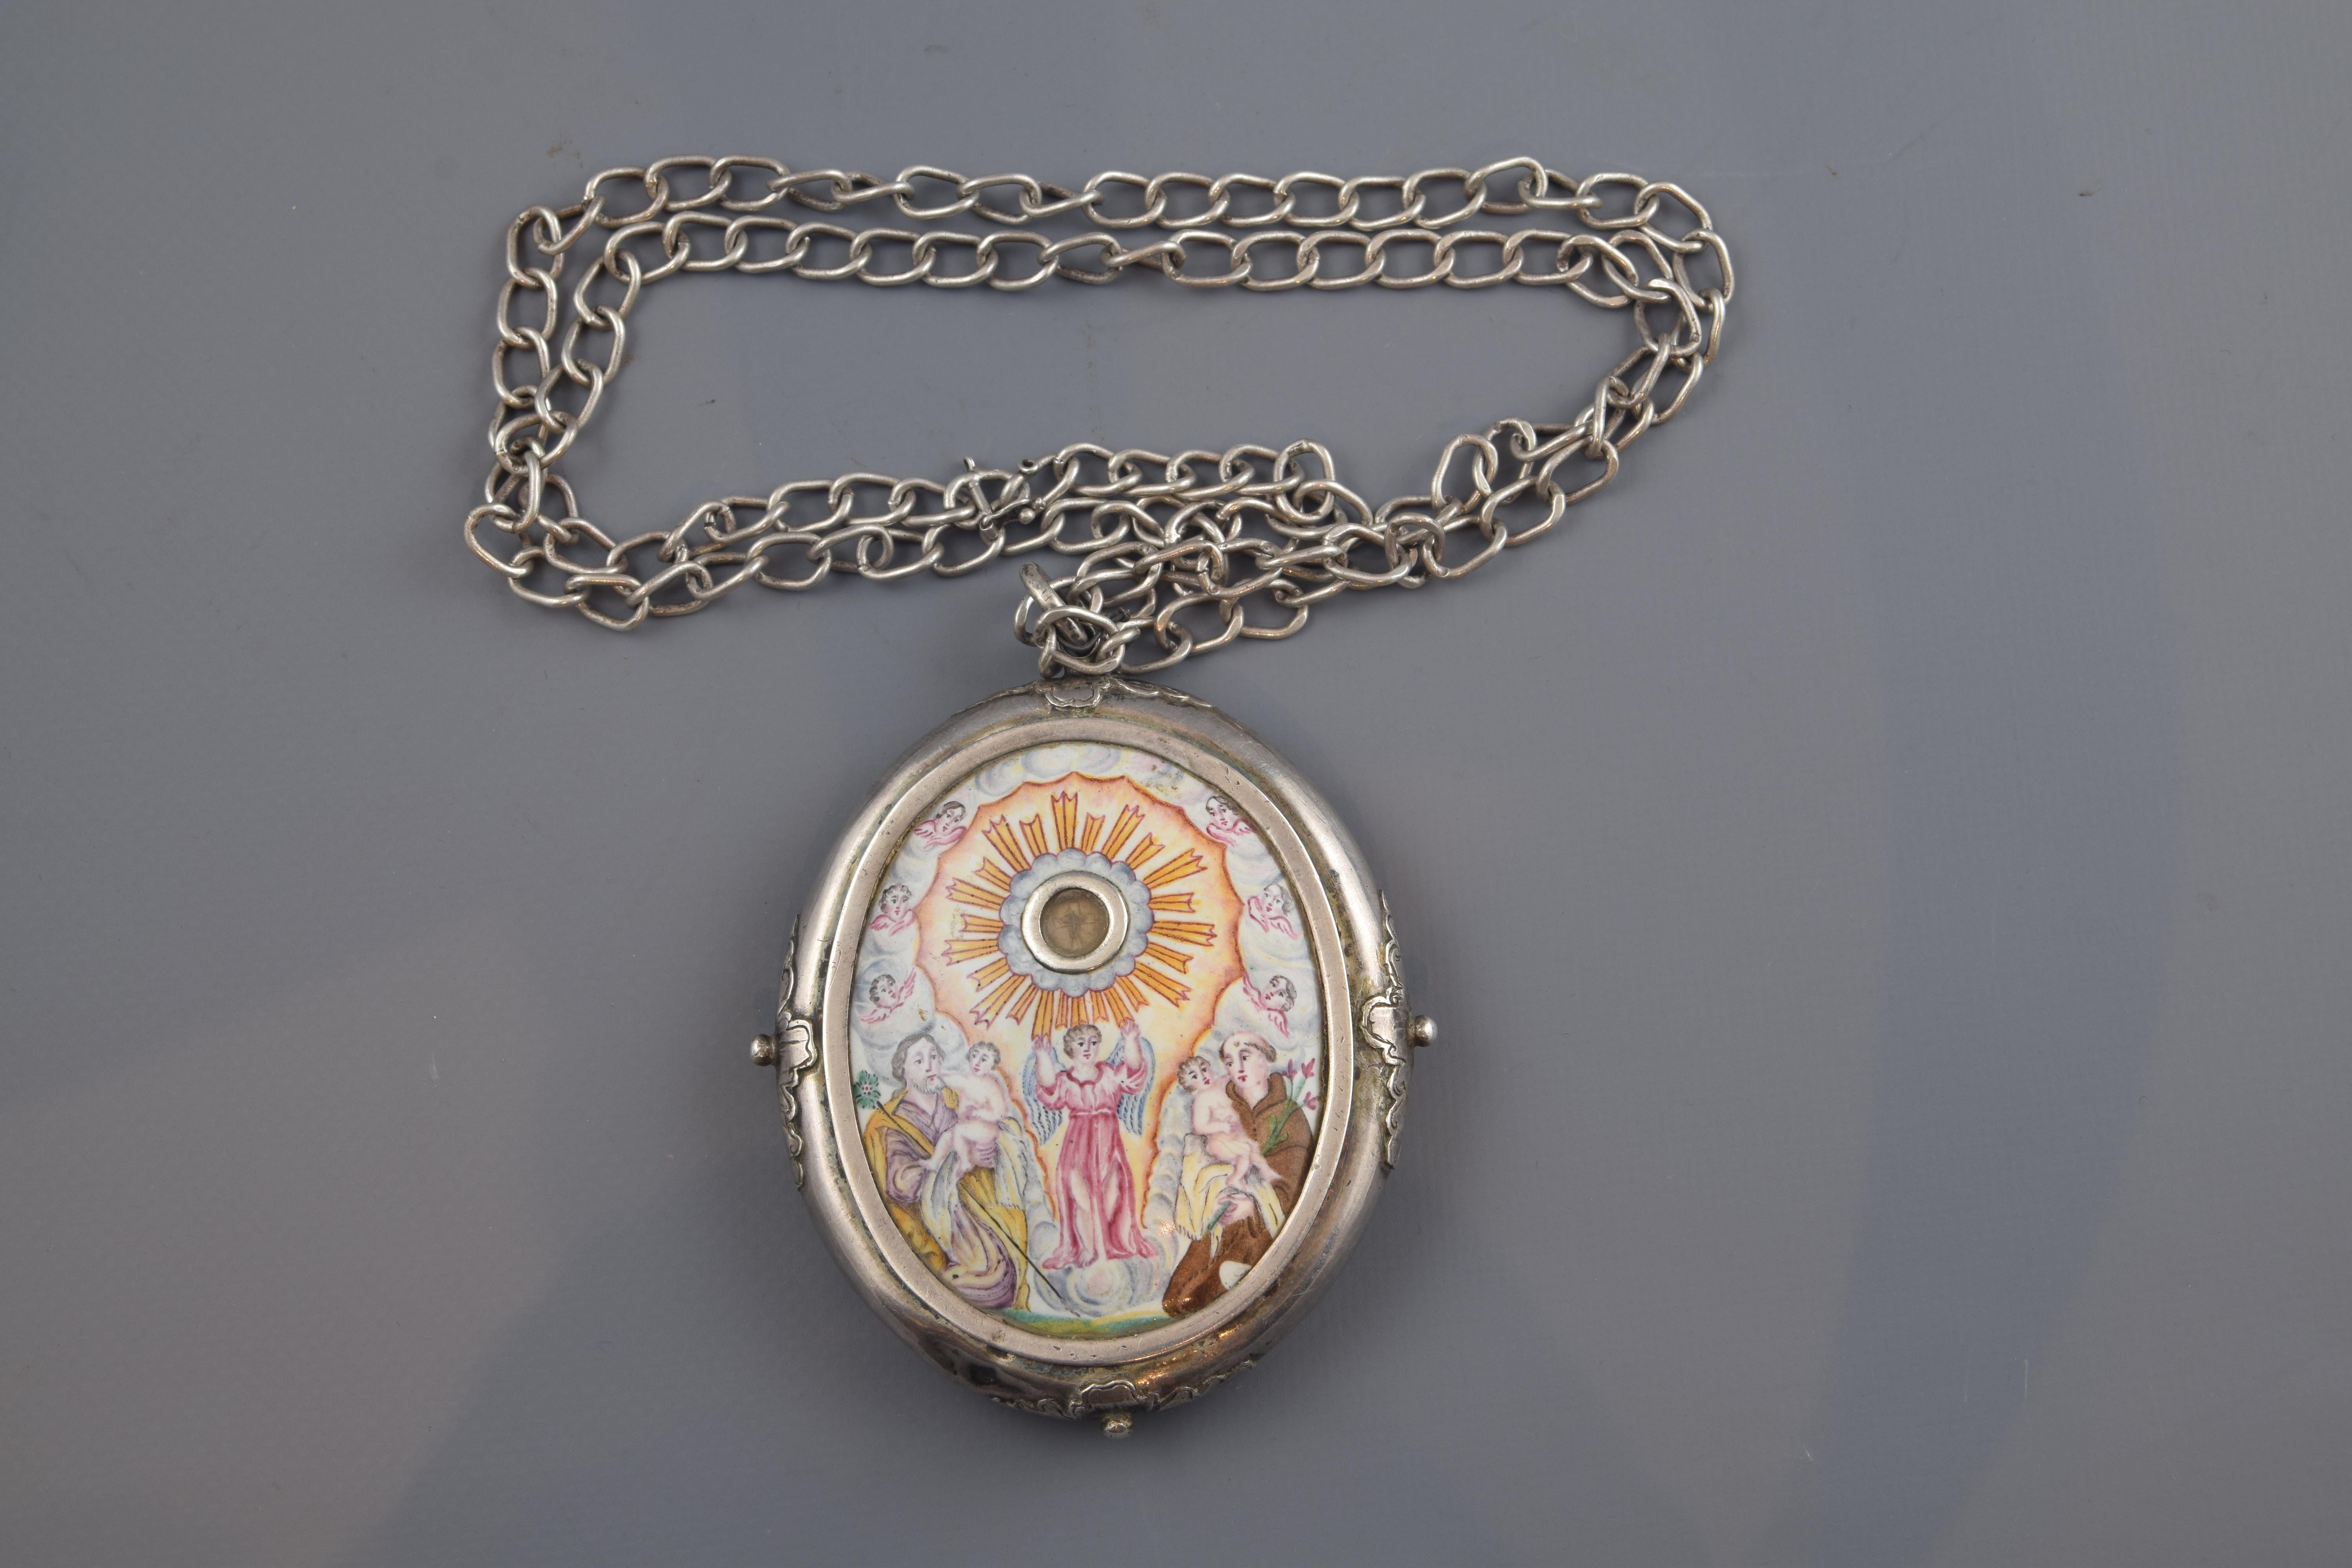 On one side of the pendant, Christ appears tied to a tall column in the center of the composition, being whipped by two sayones or soldiers with branches, following a customary composition in the 16th century. On the other side, the protagonism is